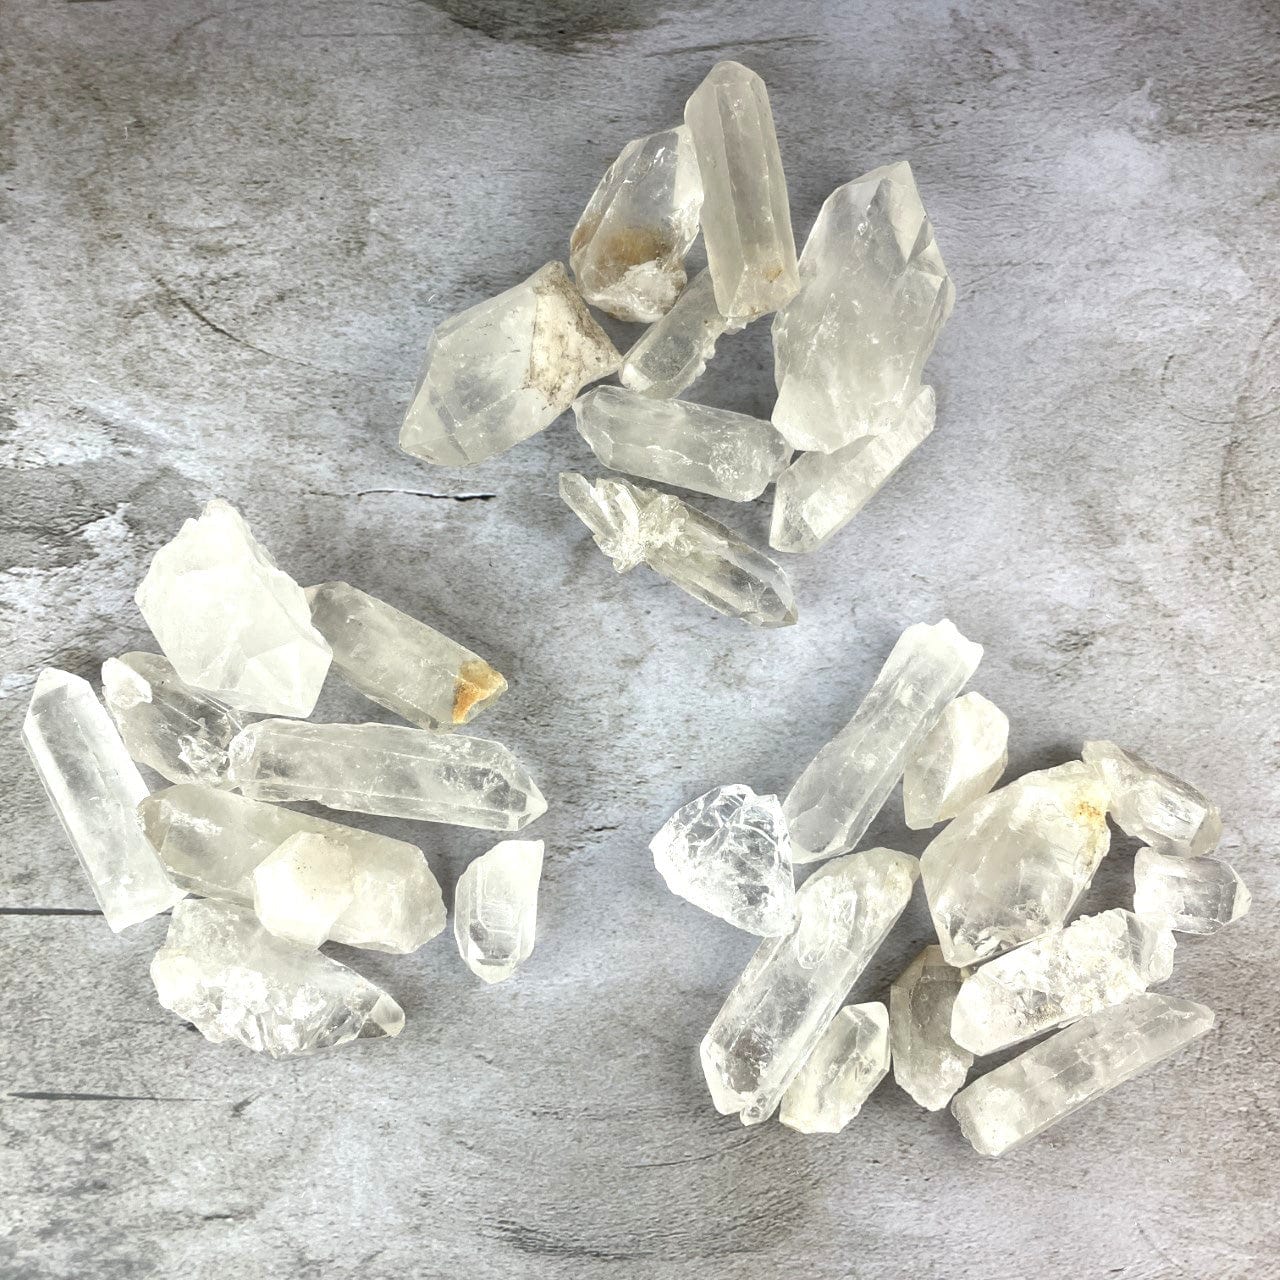 3 piles of Crystal Quartz Points - 1 Pound Bags worth